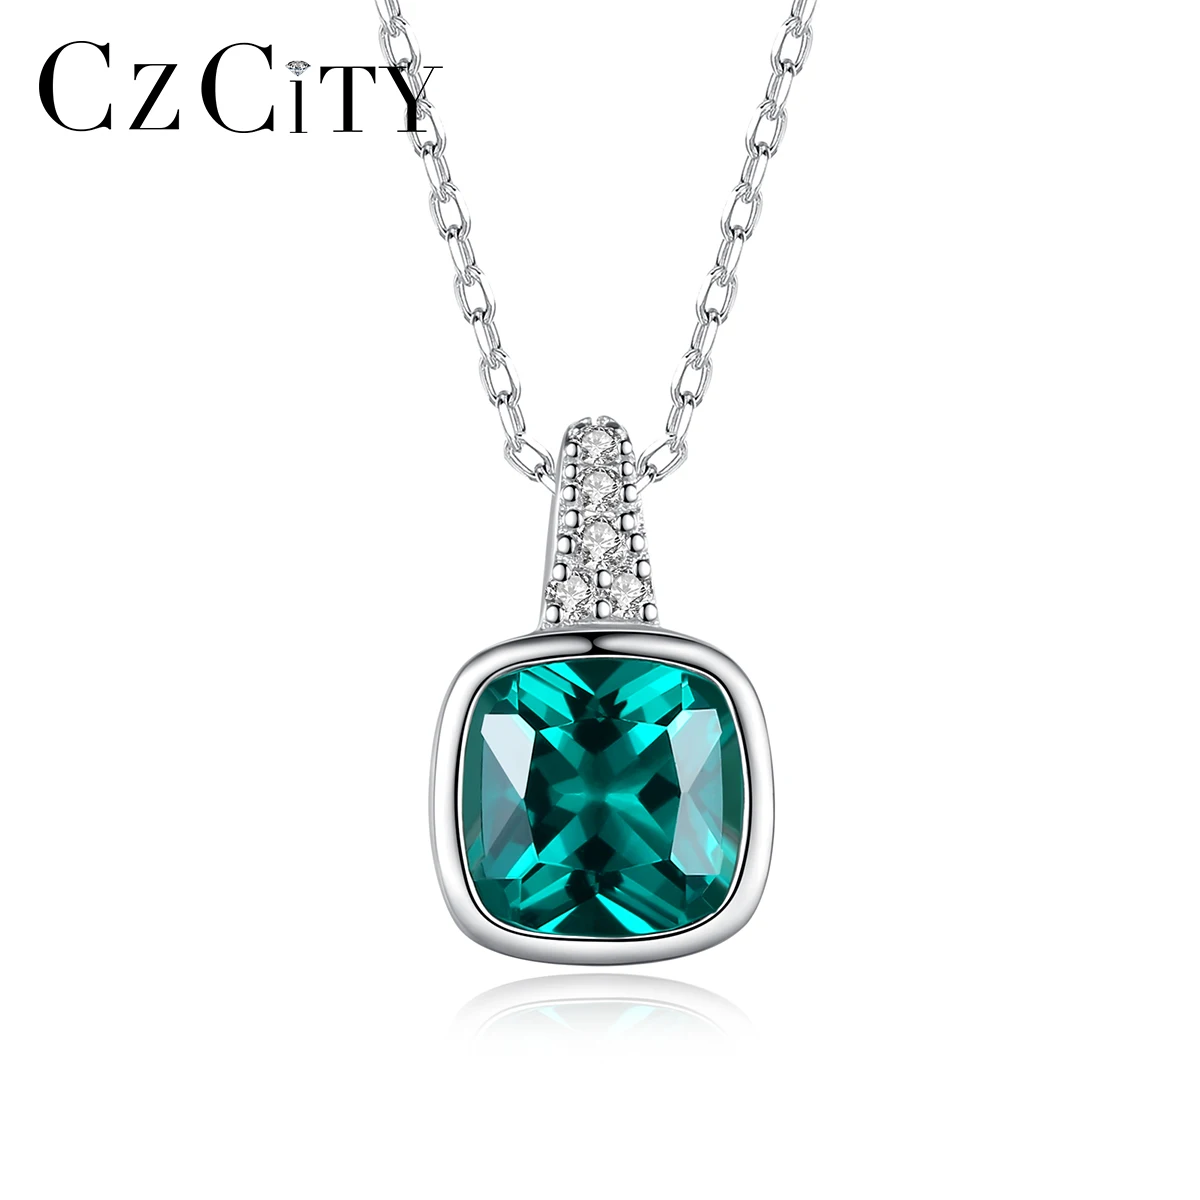 

CZCITY 925 Emerald Cushion Cut Zircon Pendant Necklace Sterling Silver Gemstone Jewelry for Women Engagement Gift